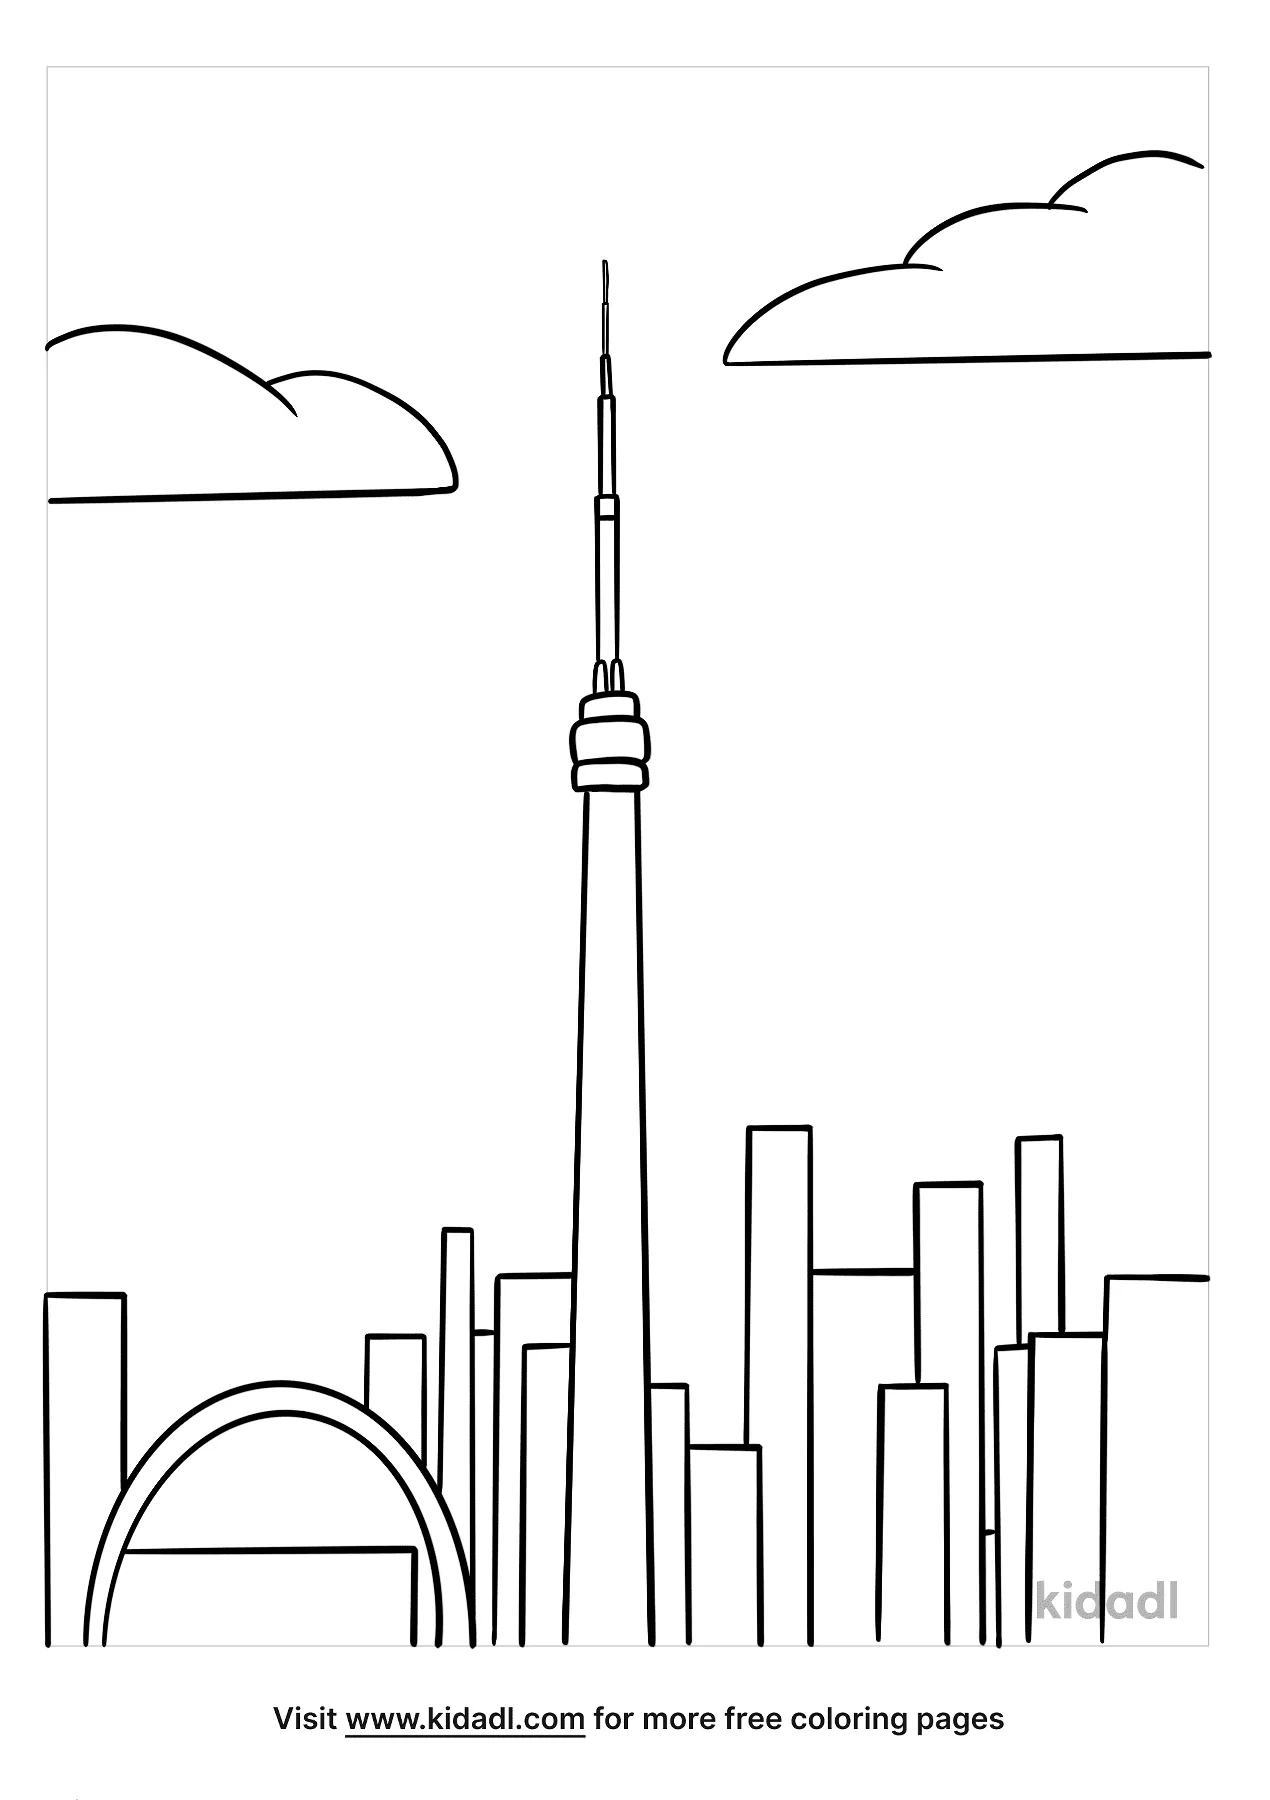 CN Tower Coloring Page | Free Buildings Coloring Page | Kidadl